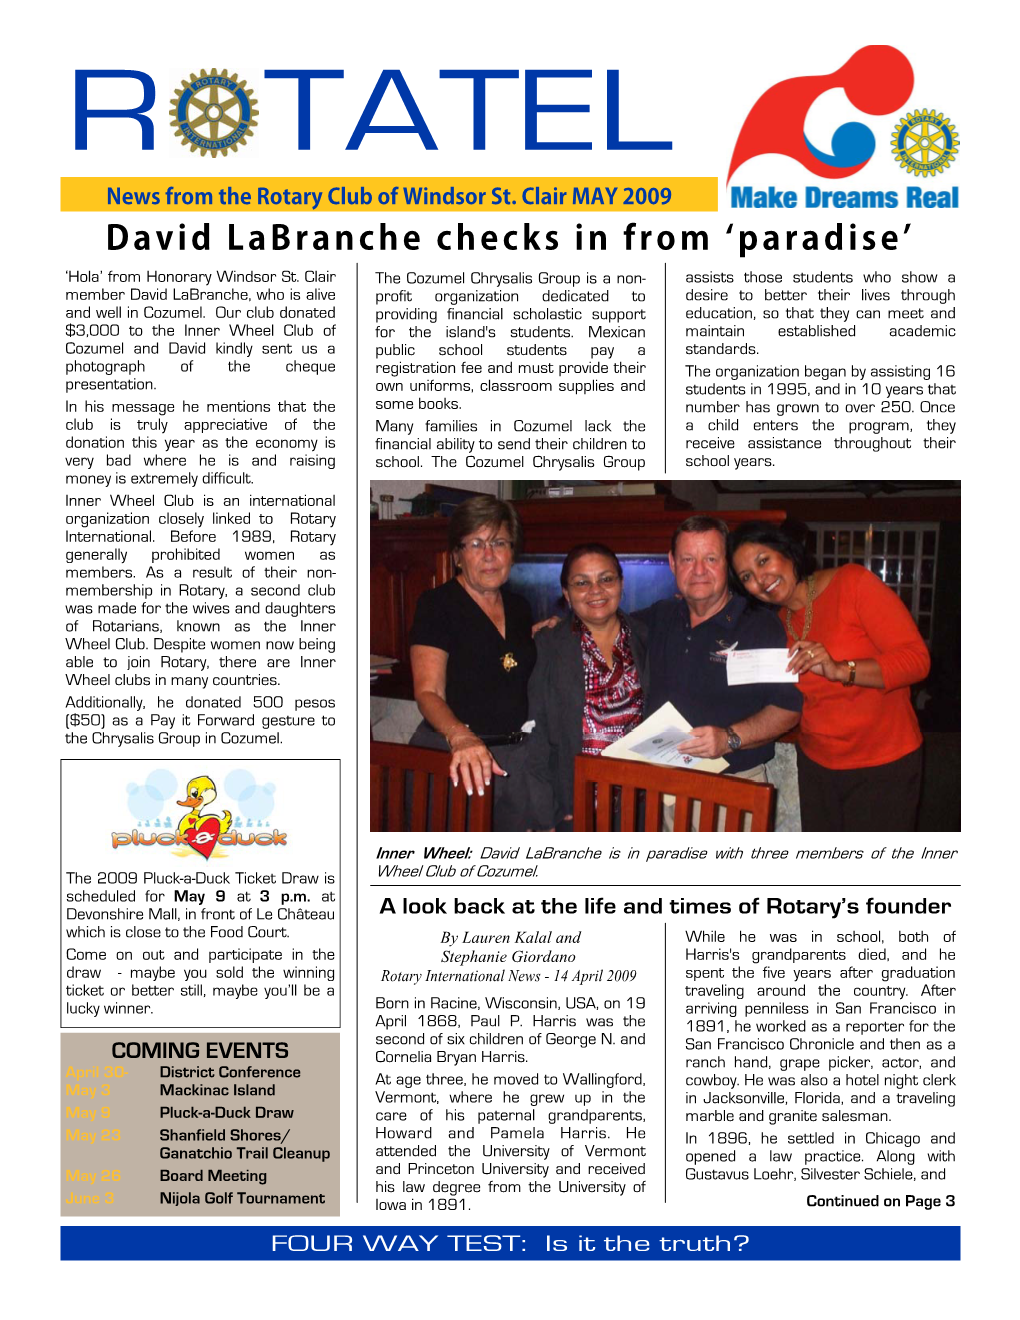 David Labranche Checks in from Paradise